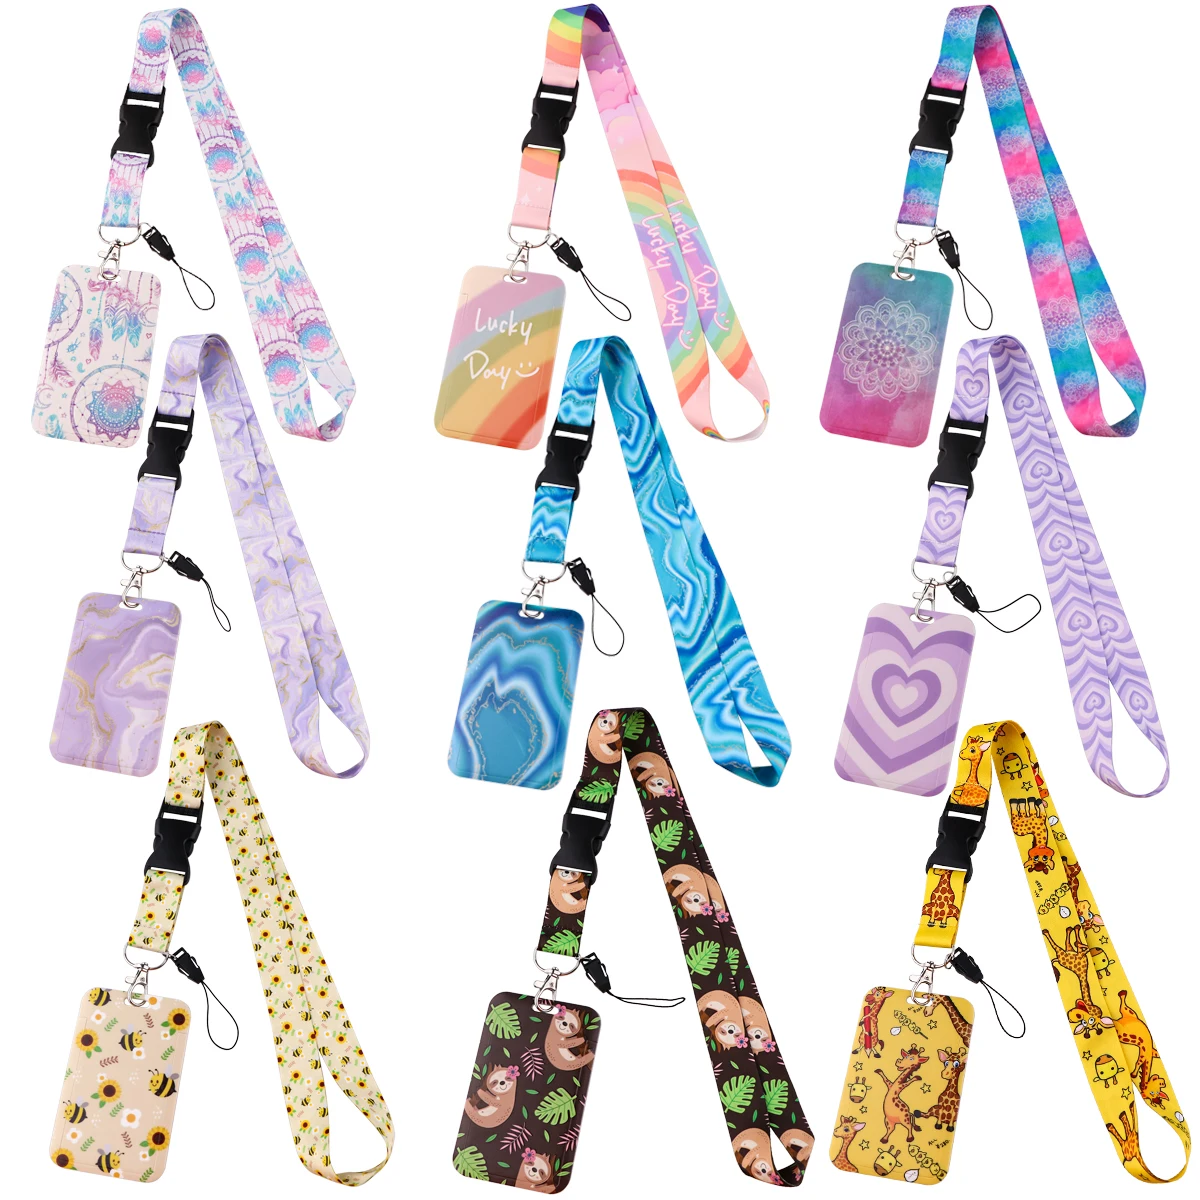 Marble Printing Lanyards for Keys Neck Strap ID Card Gym Cell Phone Straps USB Badge Holder DIY Hang Rope Neckband Accessories santa claus cartoon lanyard keychain lanyards for keys badge id mobile phone rope neck straps accessories christmas gift